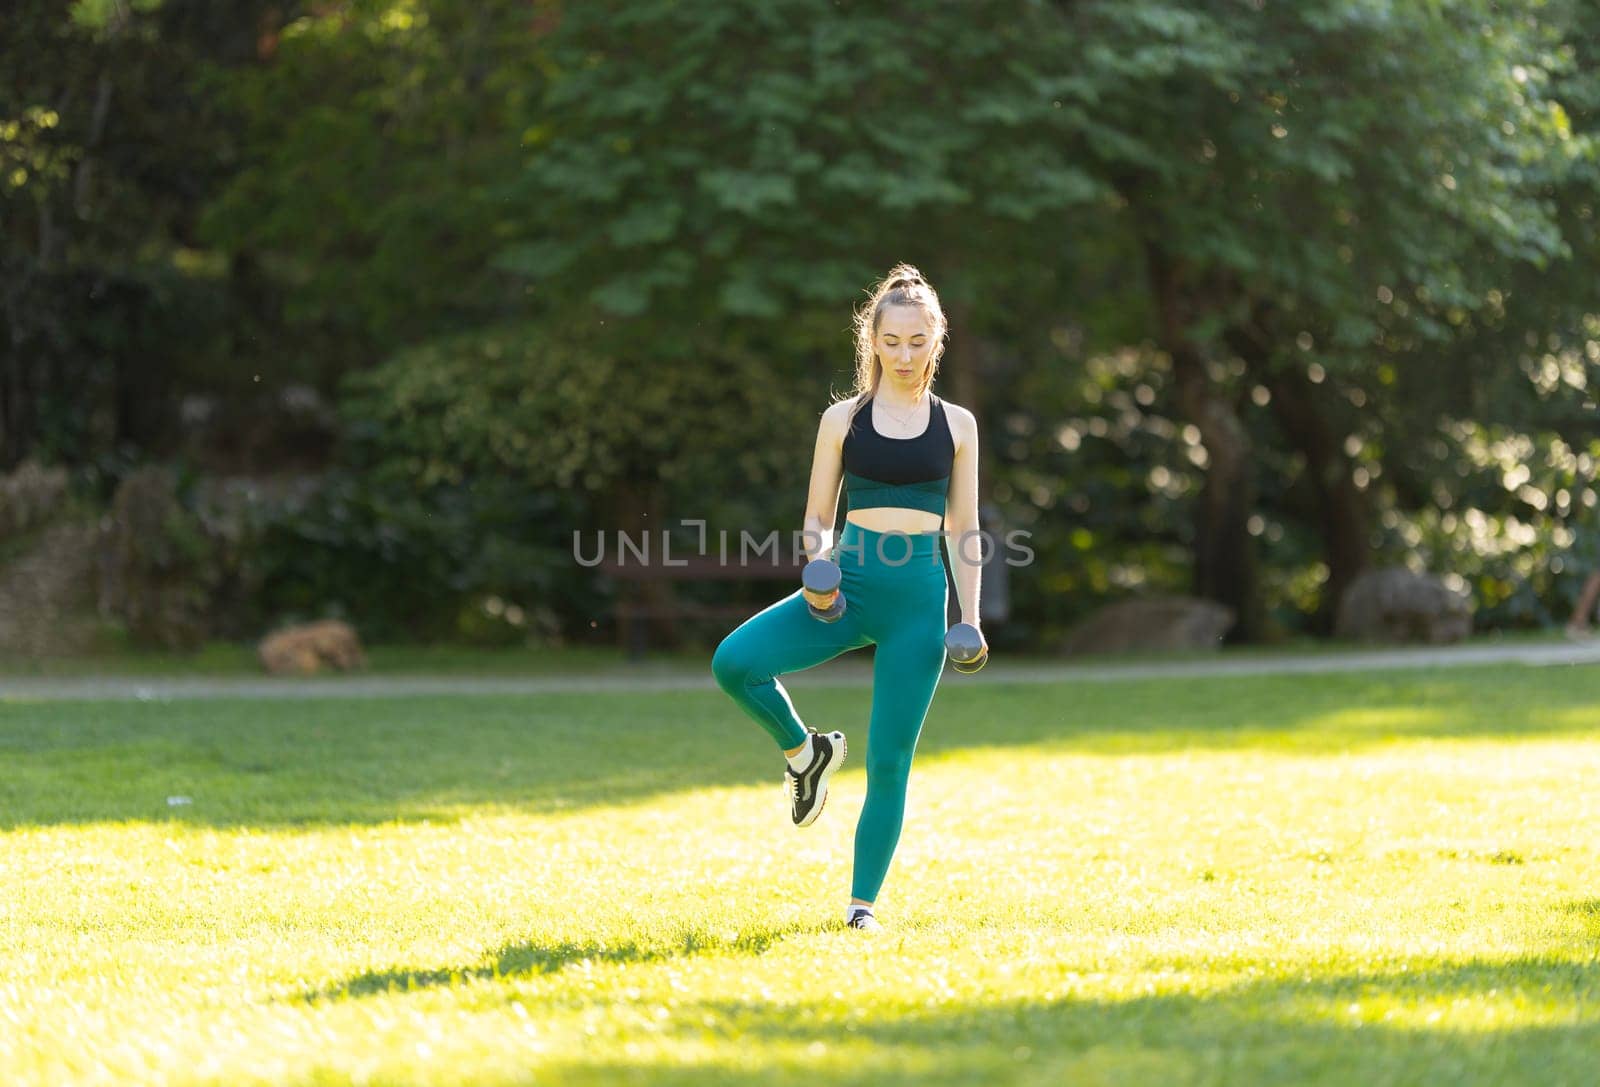 A woman is exercising in a park. She is wearing a green top and blue pants. She is holding two dumbbells in her hands